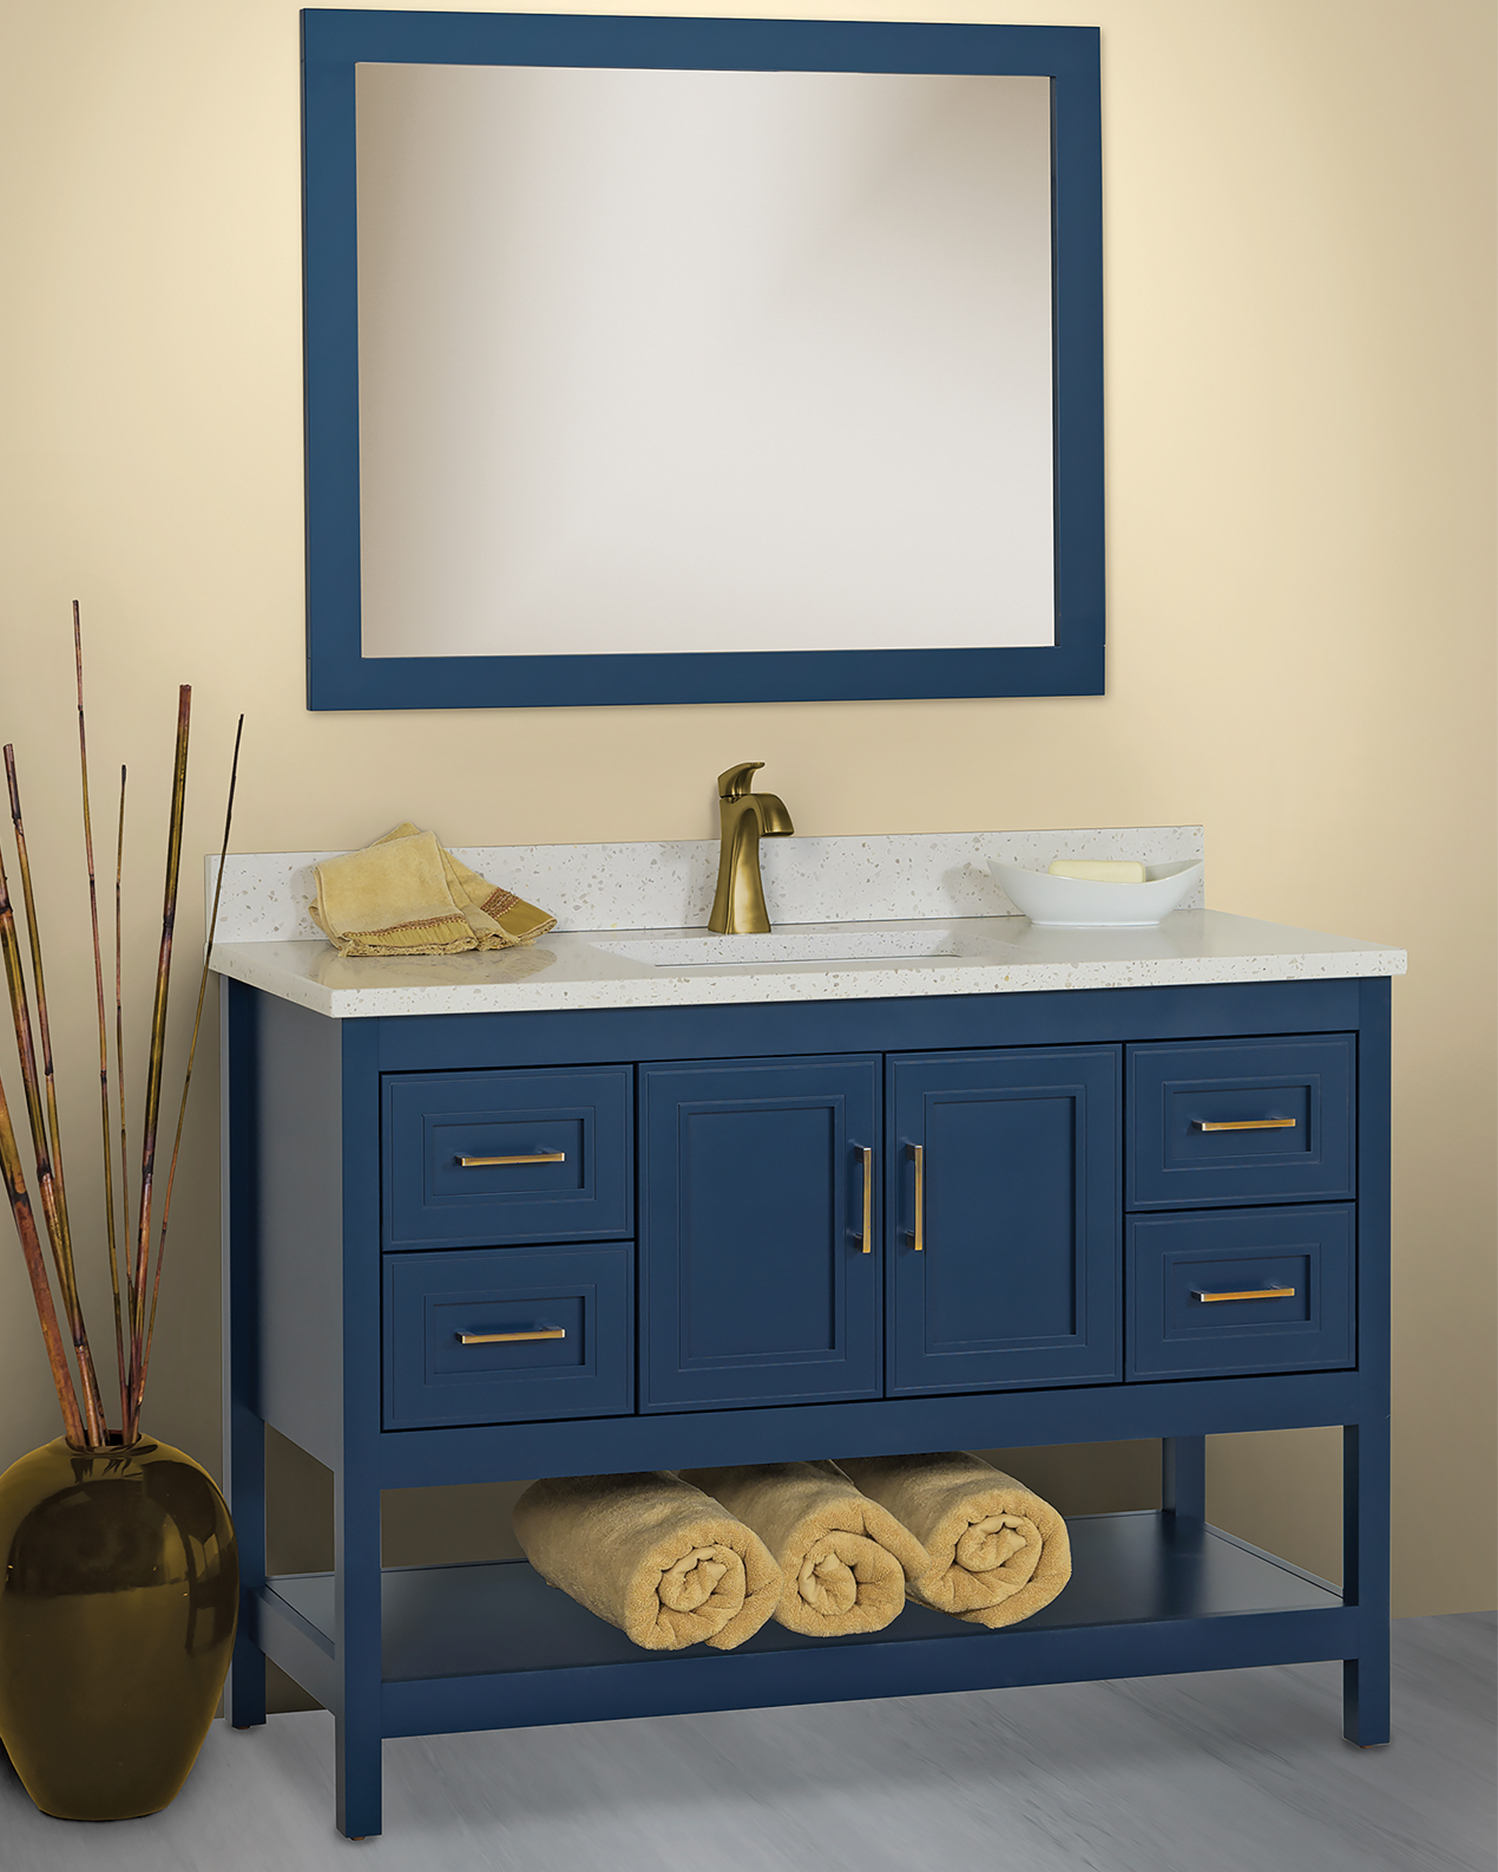 Strasser Woodenworks introduced a new finish for its solid wood bathroom vanities 